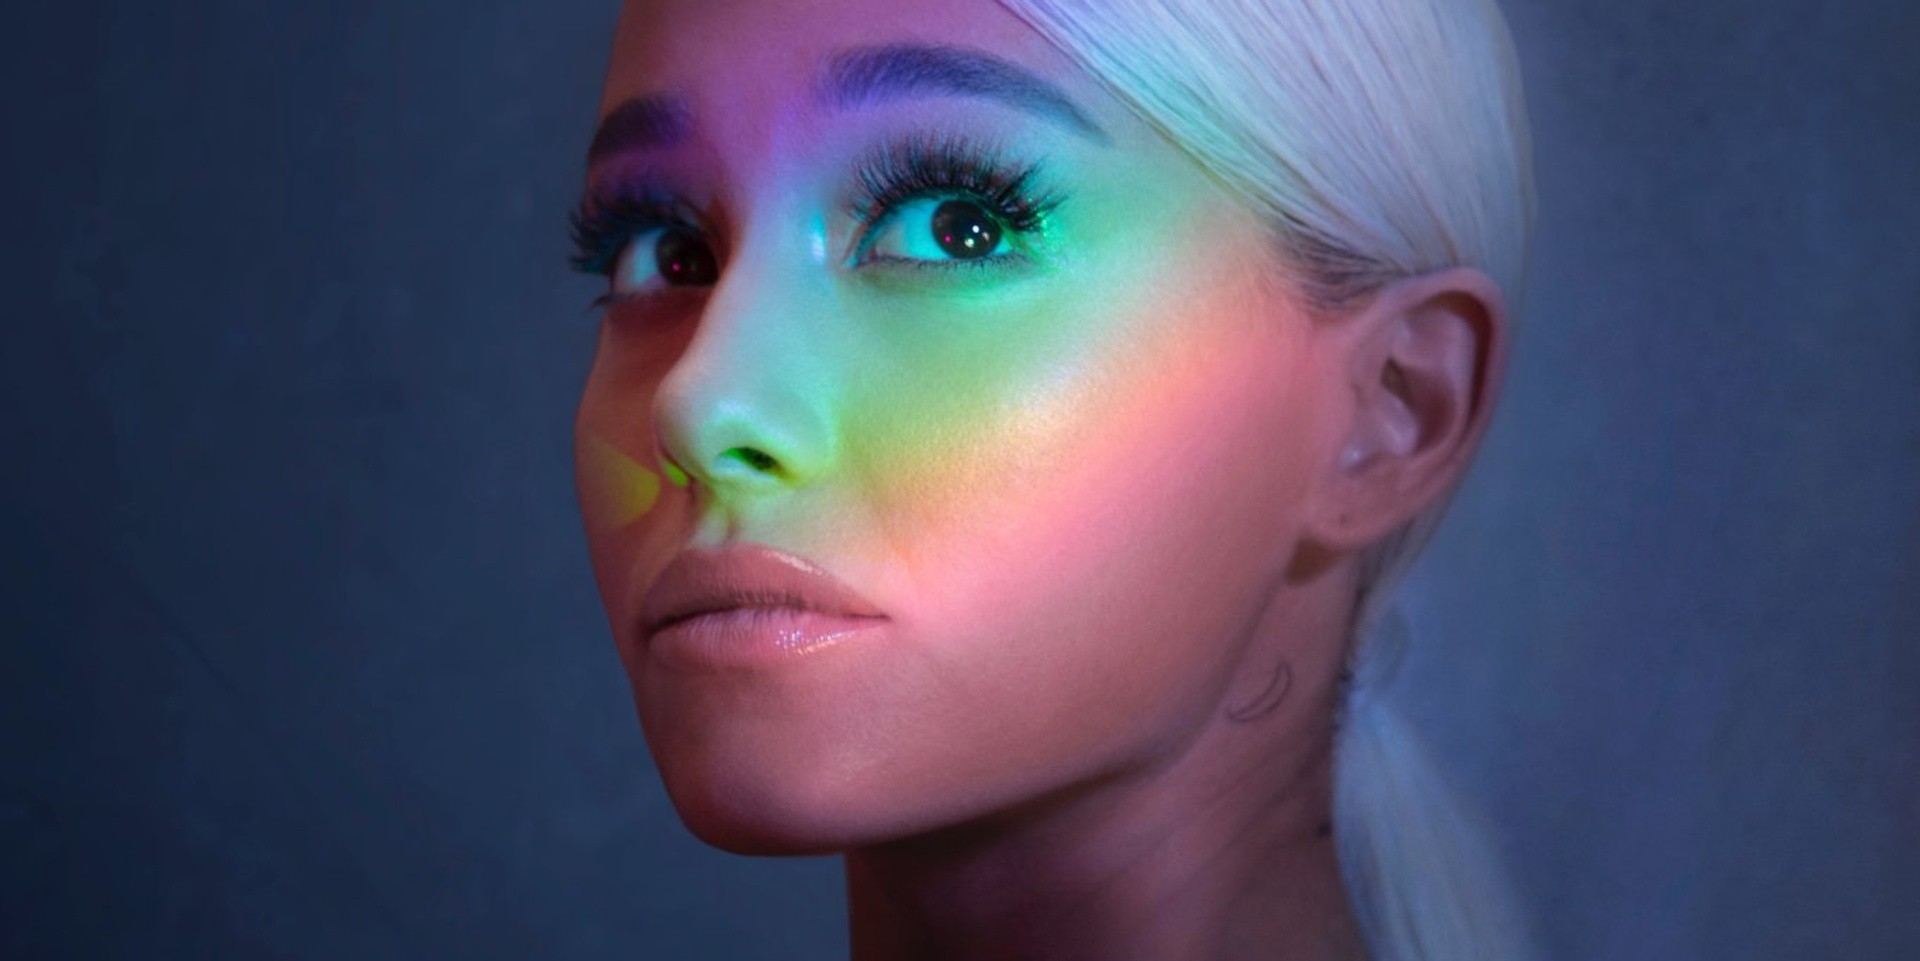 Ariana Grande returns with dizzying video for new single 'No Tears Left To Cry' – watch